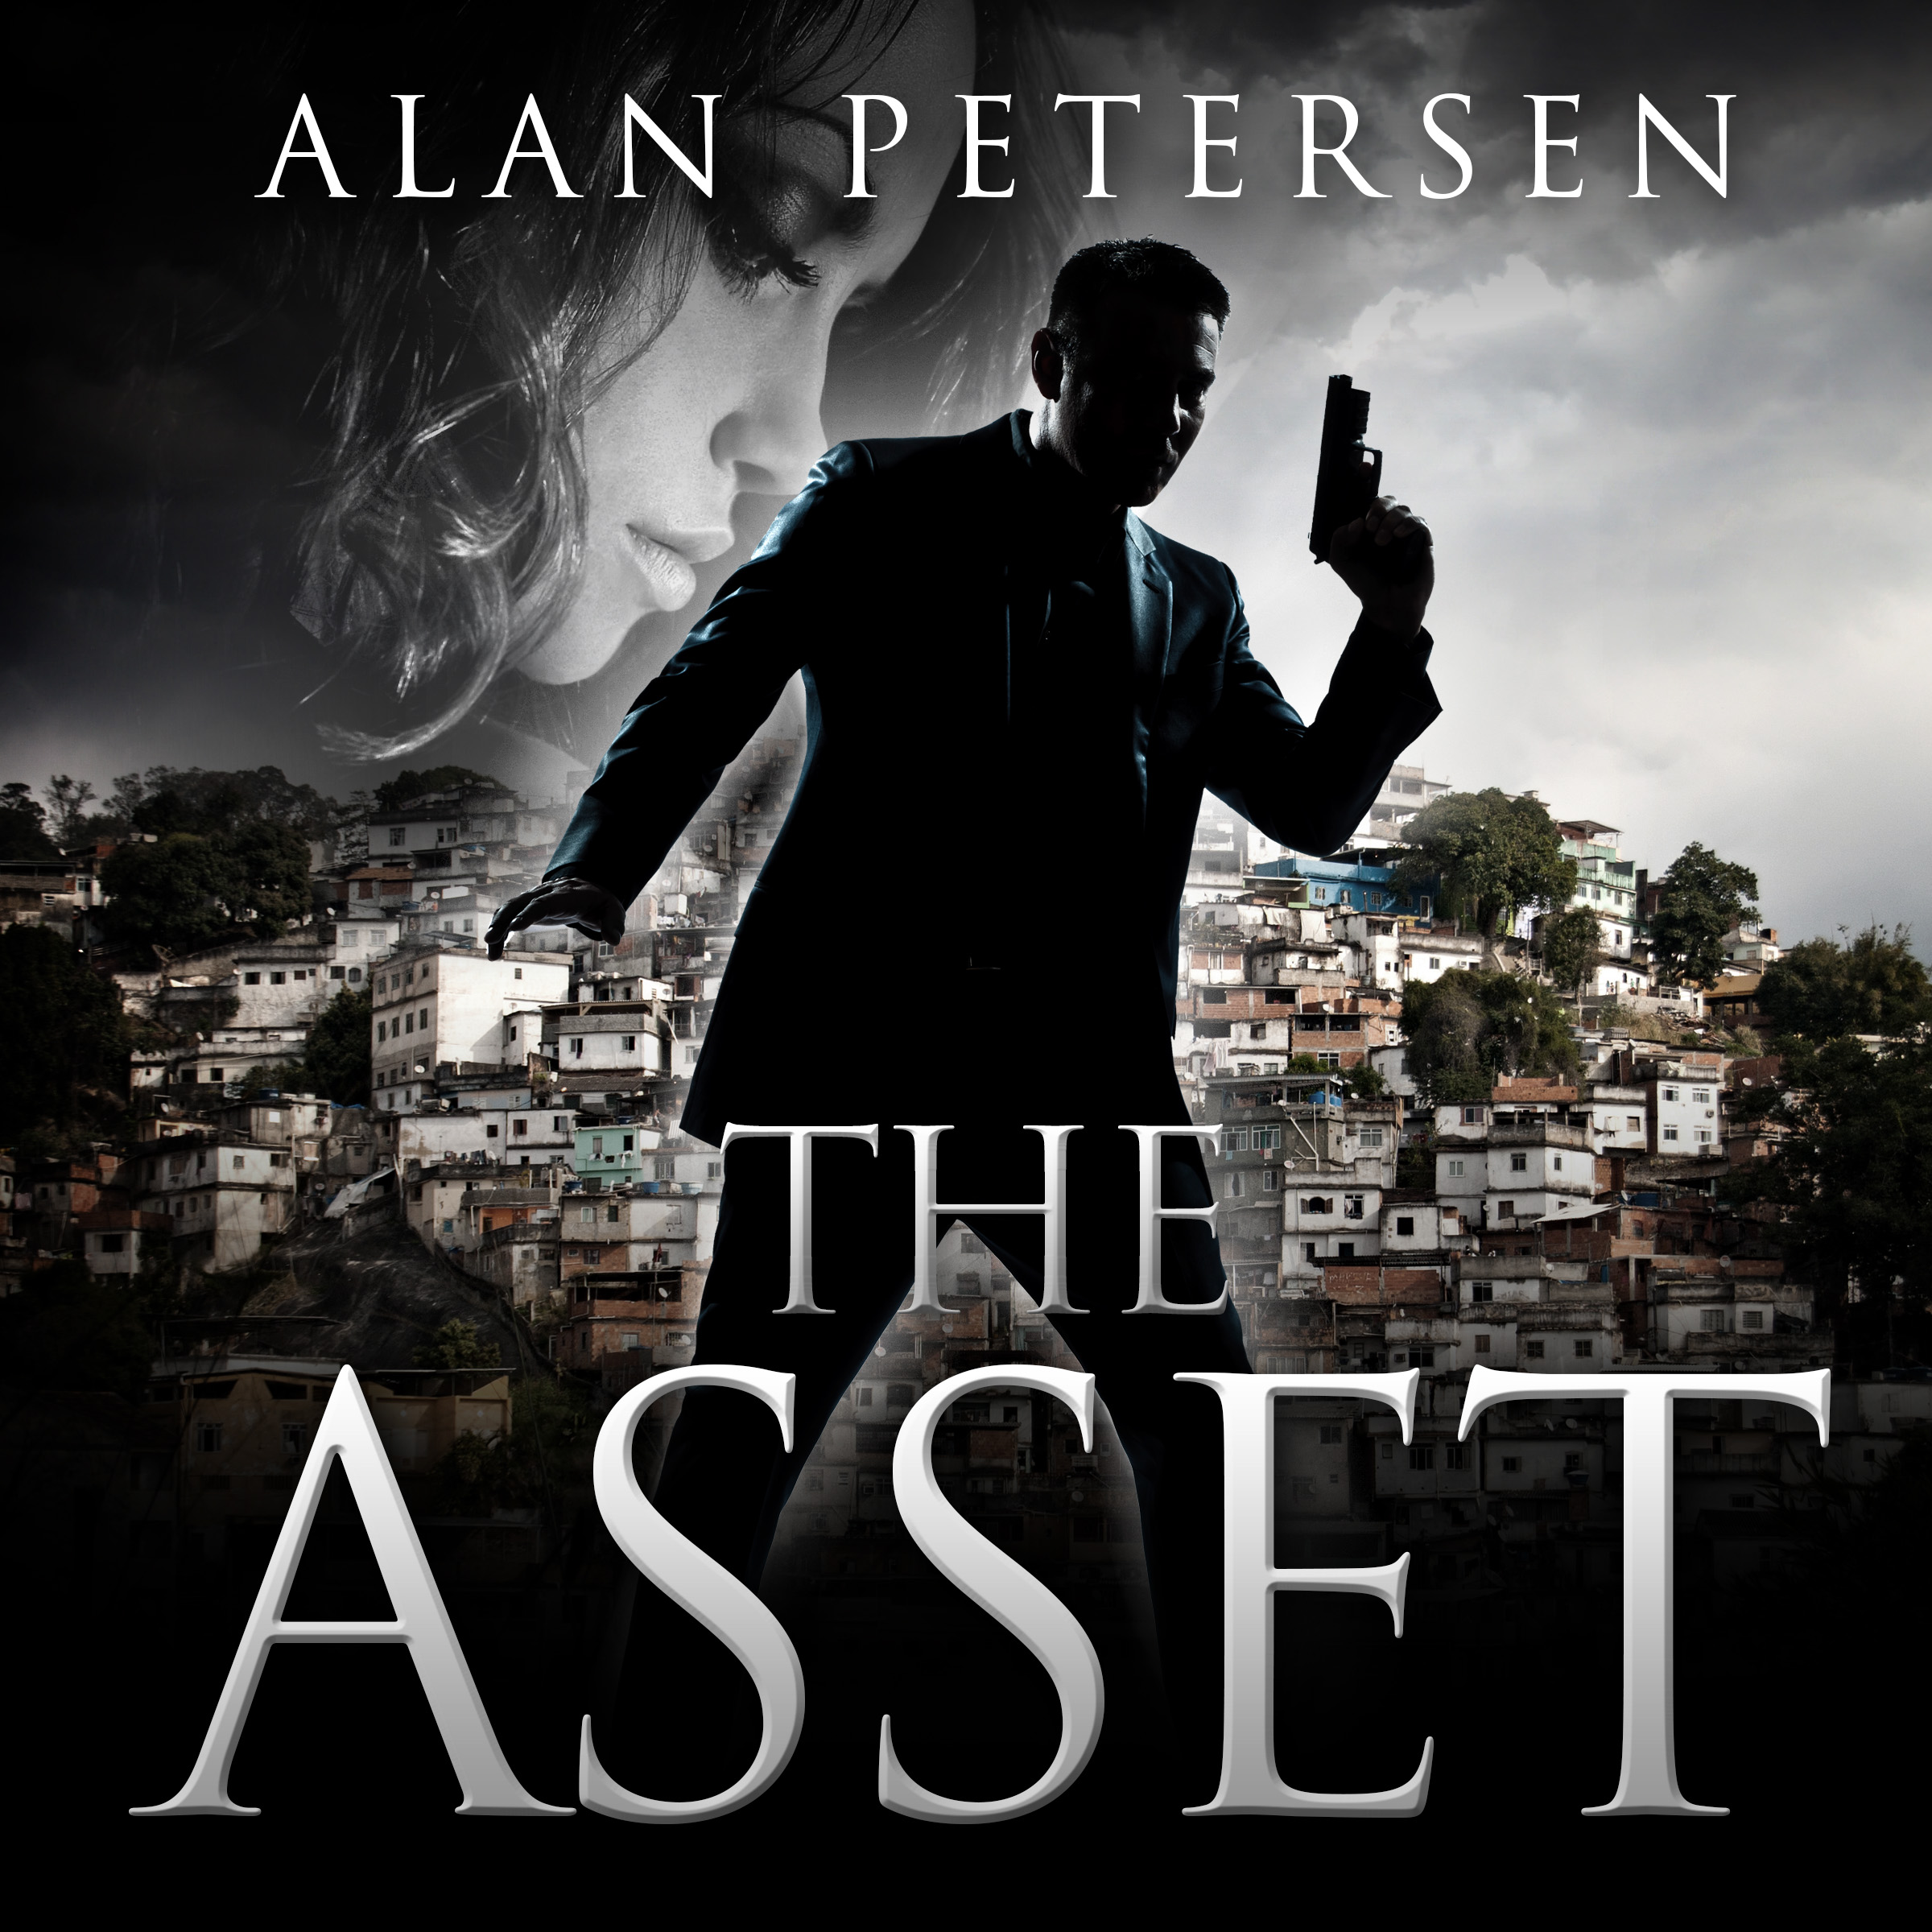 Audiobook Version of The Asset Almost Ready